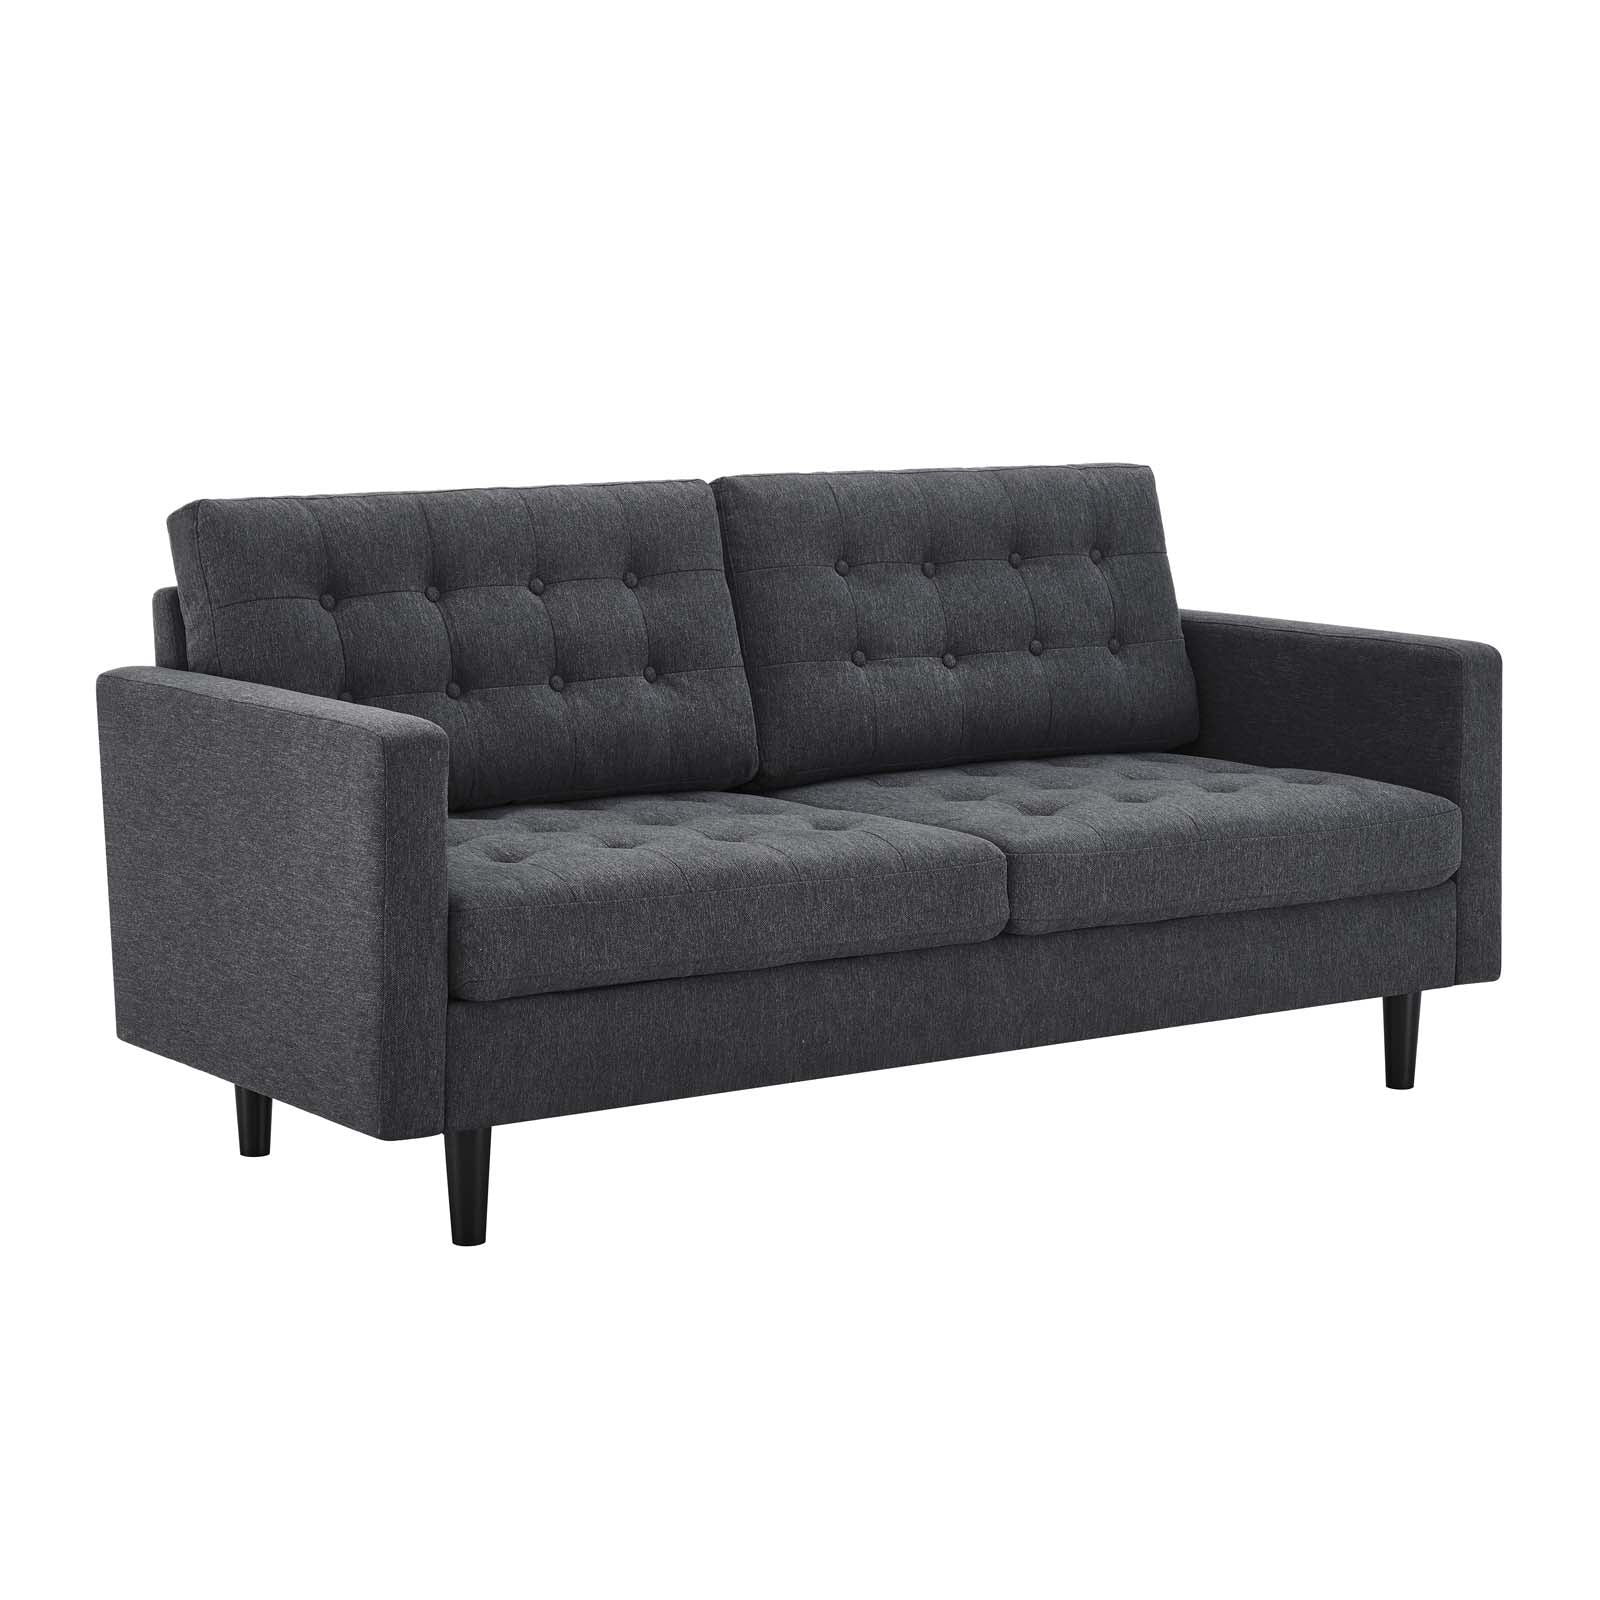 Modway Sofas & Couches - Exalt Tufted Fabric Sofa Charcoal